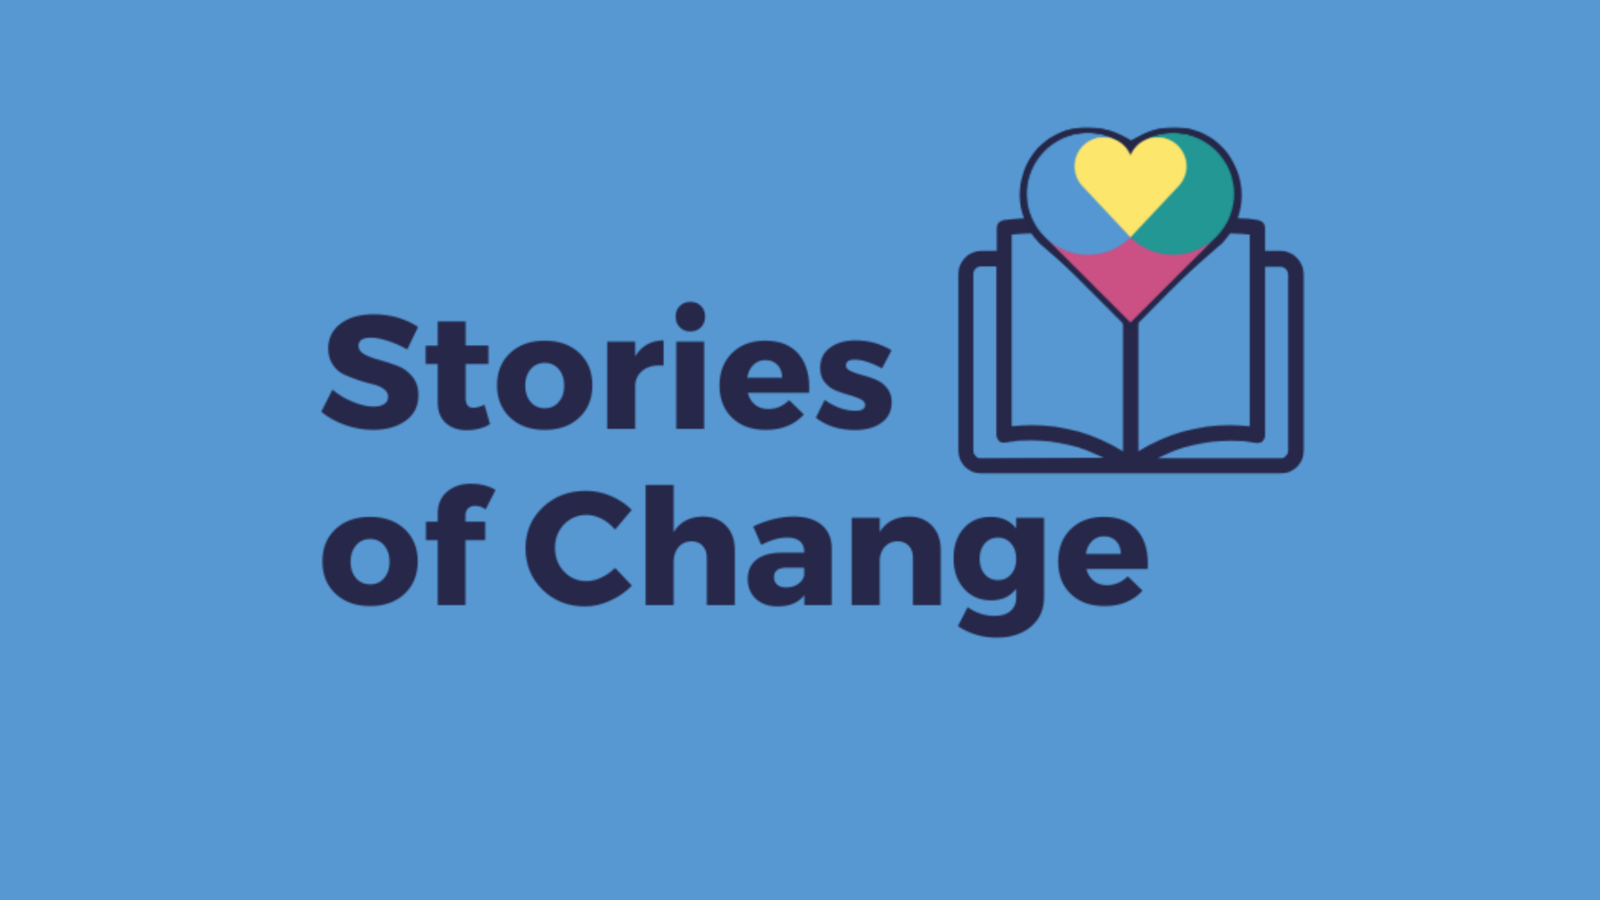 Image of the stories of change logo.